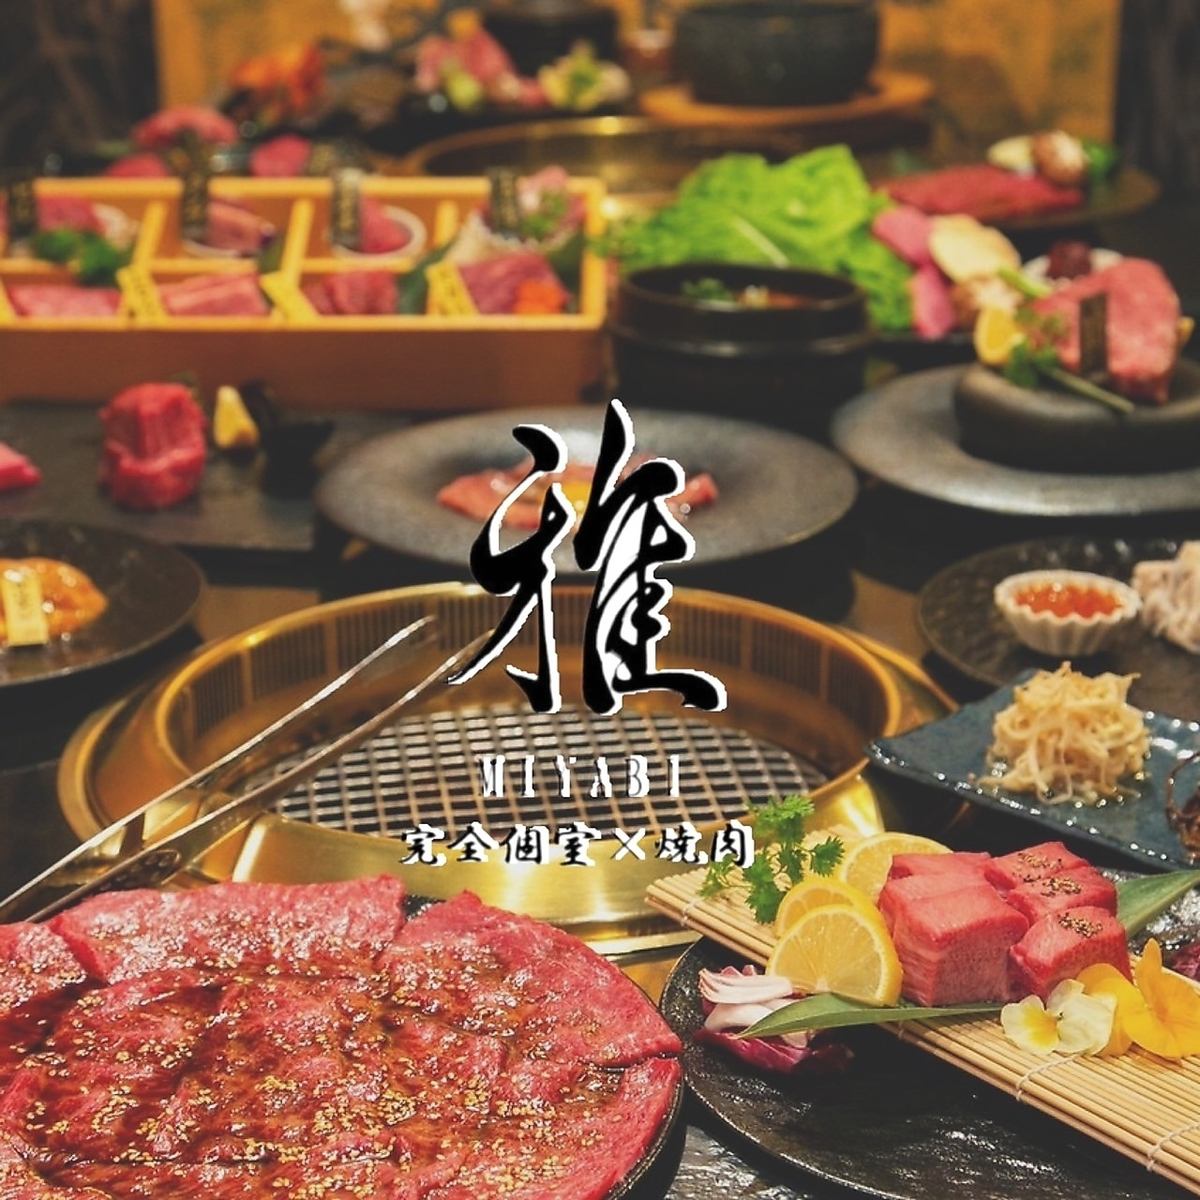 Conveniently located 5 minutes walk from Kanayama Station on each line♪ A high-quality moment with private room and grilled meat [Yakiniku Miyabi]